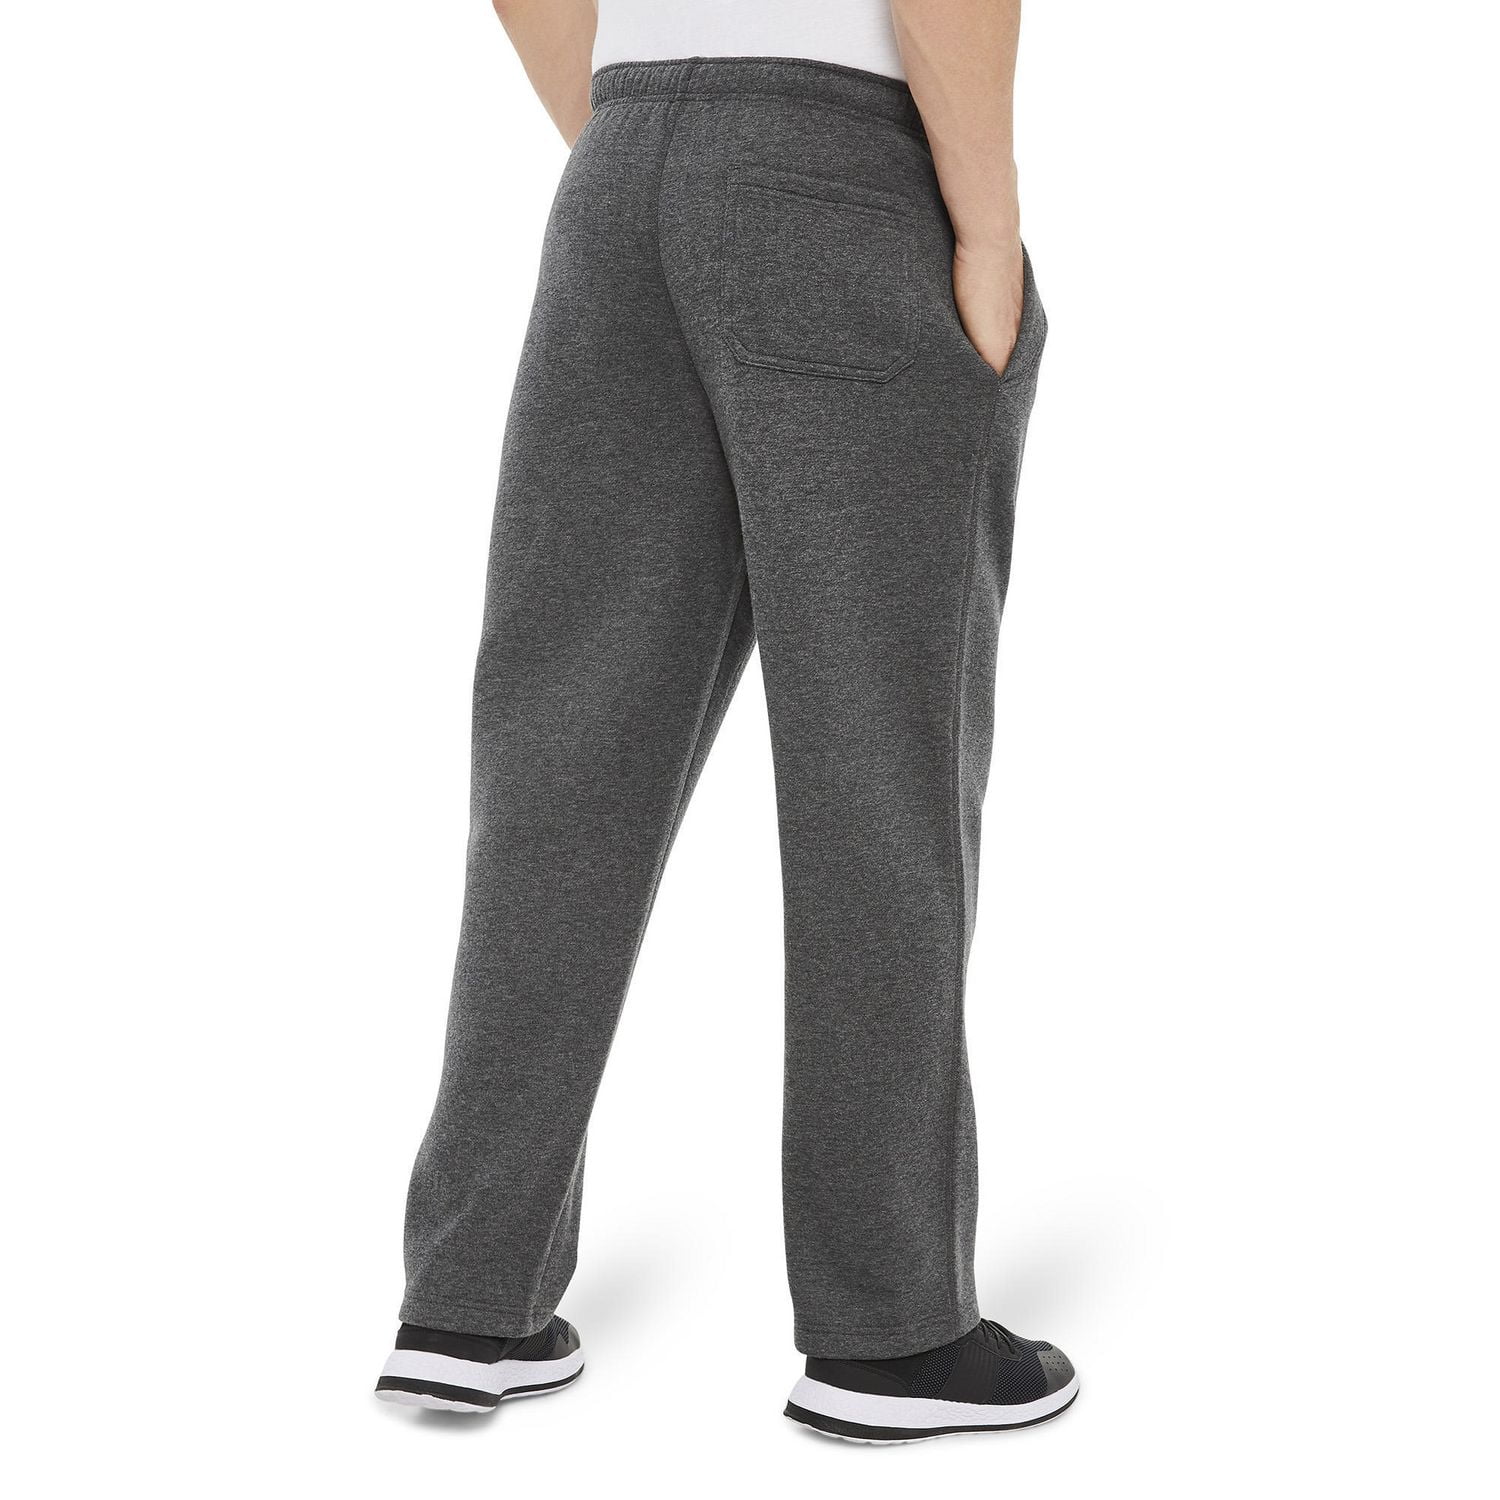 Zone Pants Classic Grey for Floorball